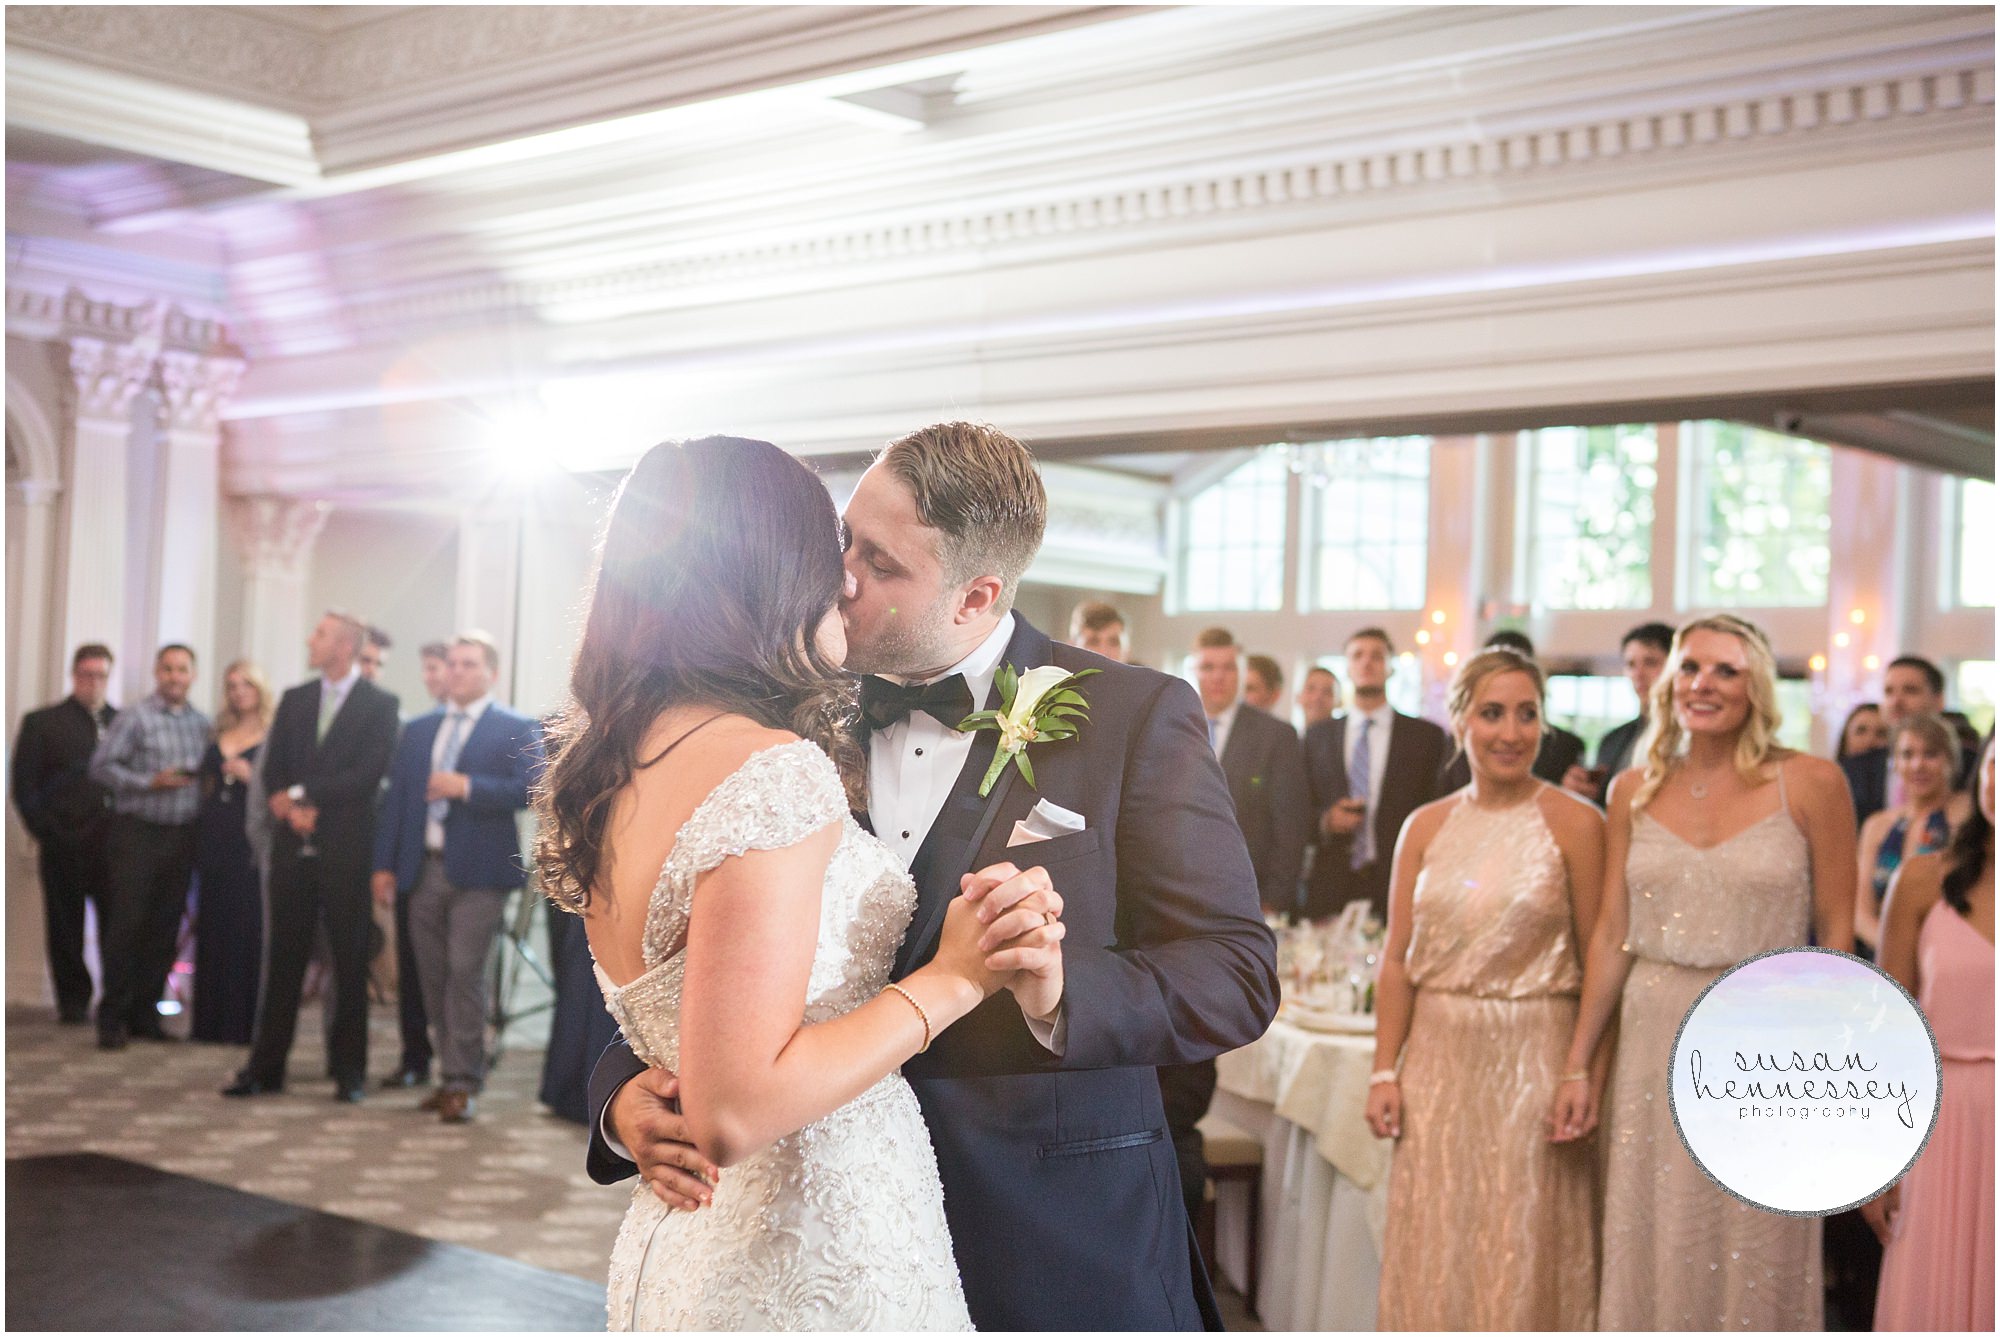 Bride and groom share a kiss during their first dance as husband and wife!